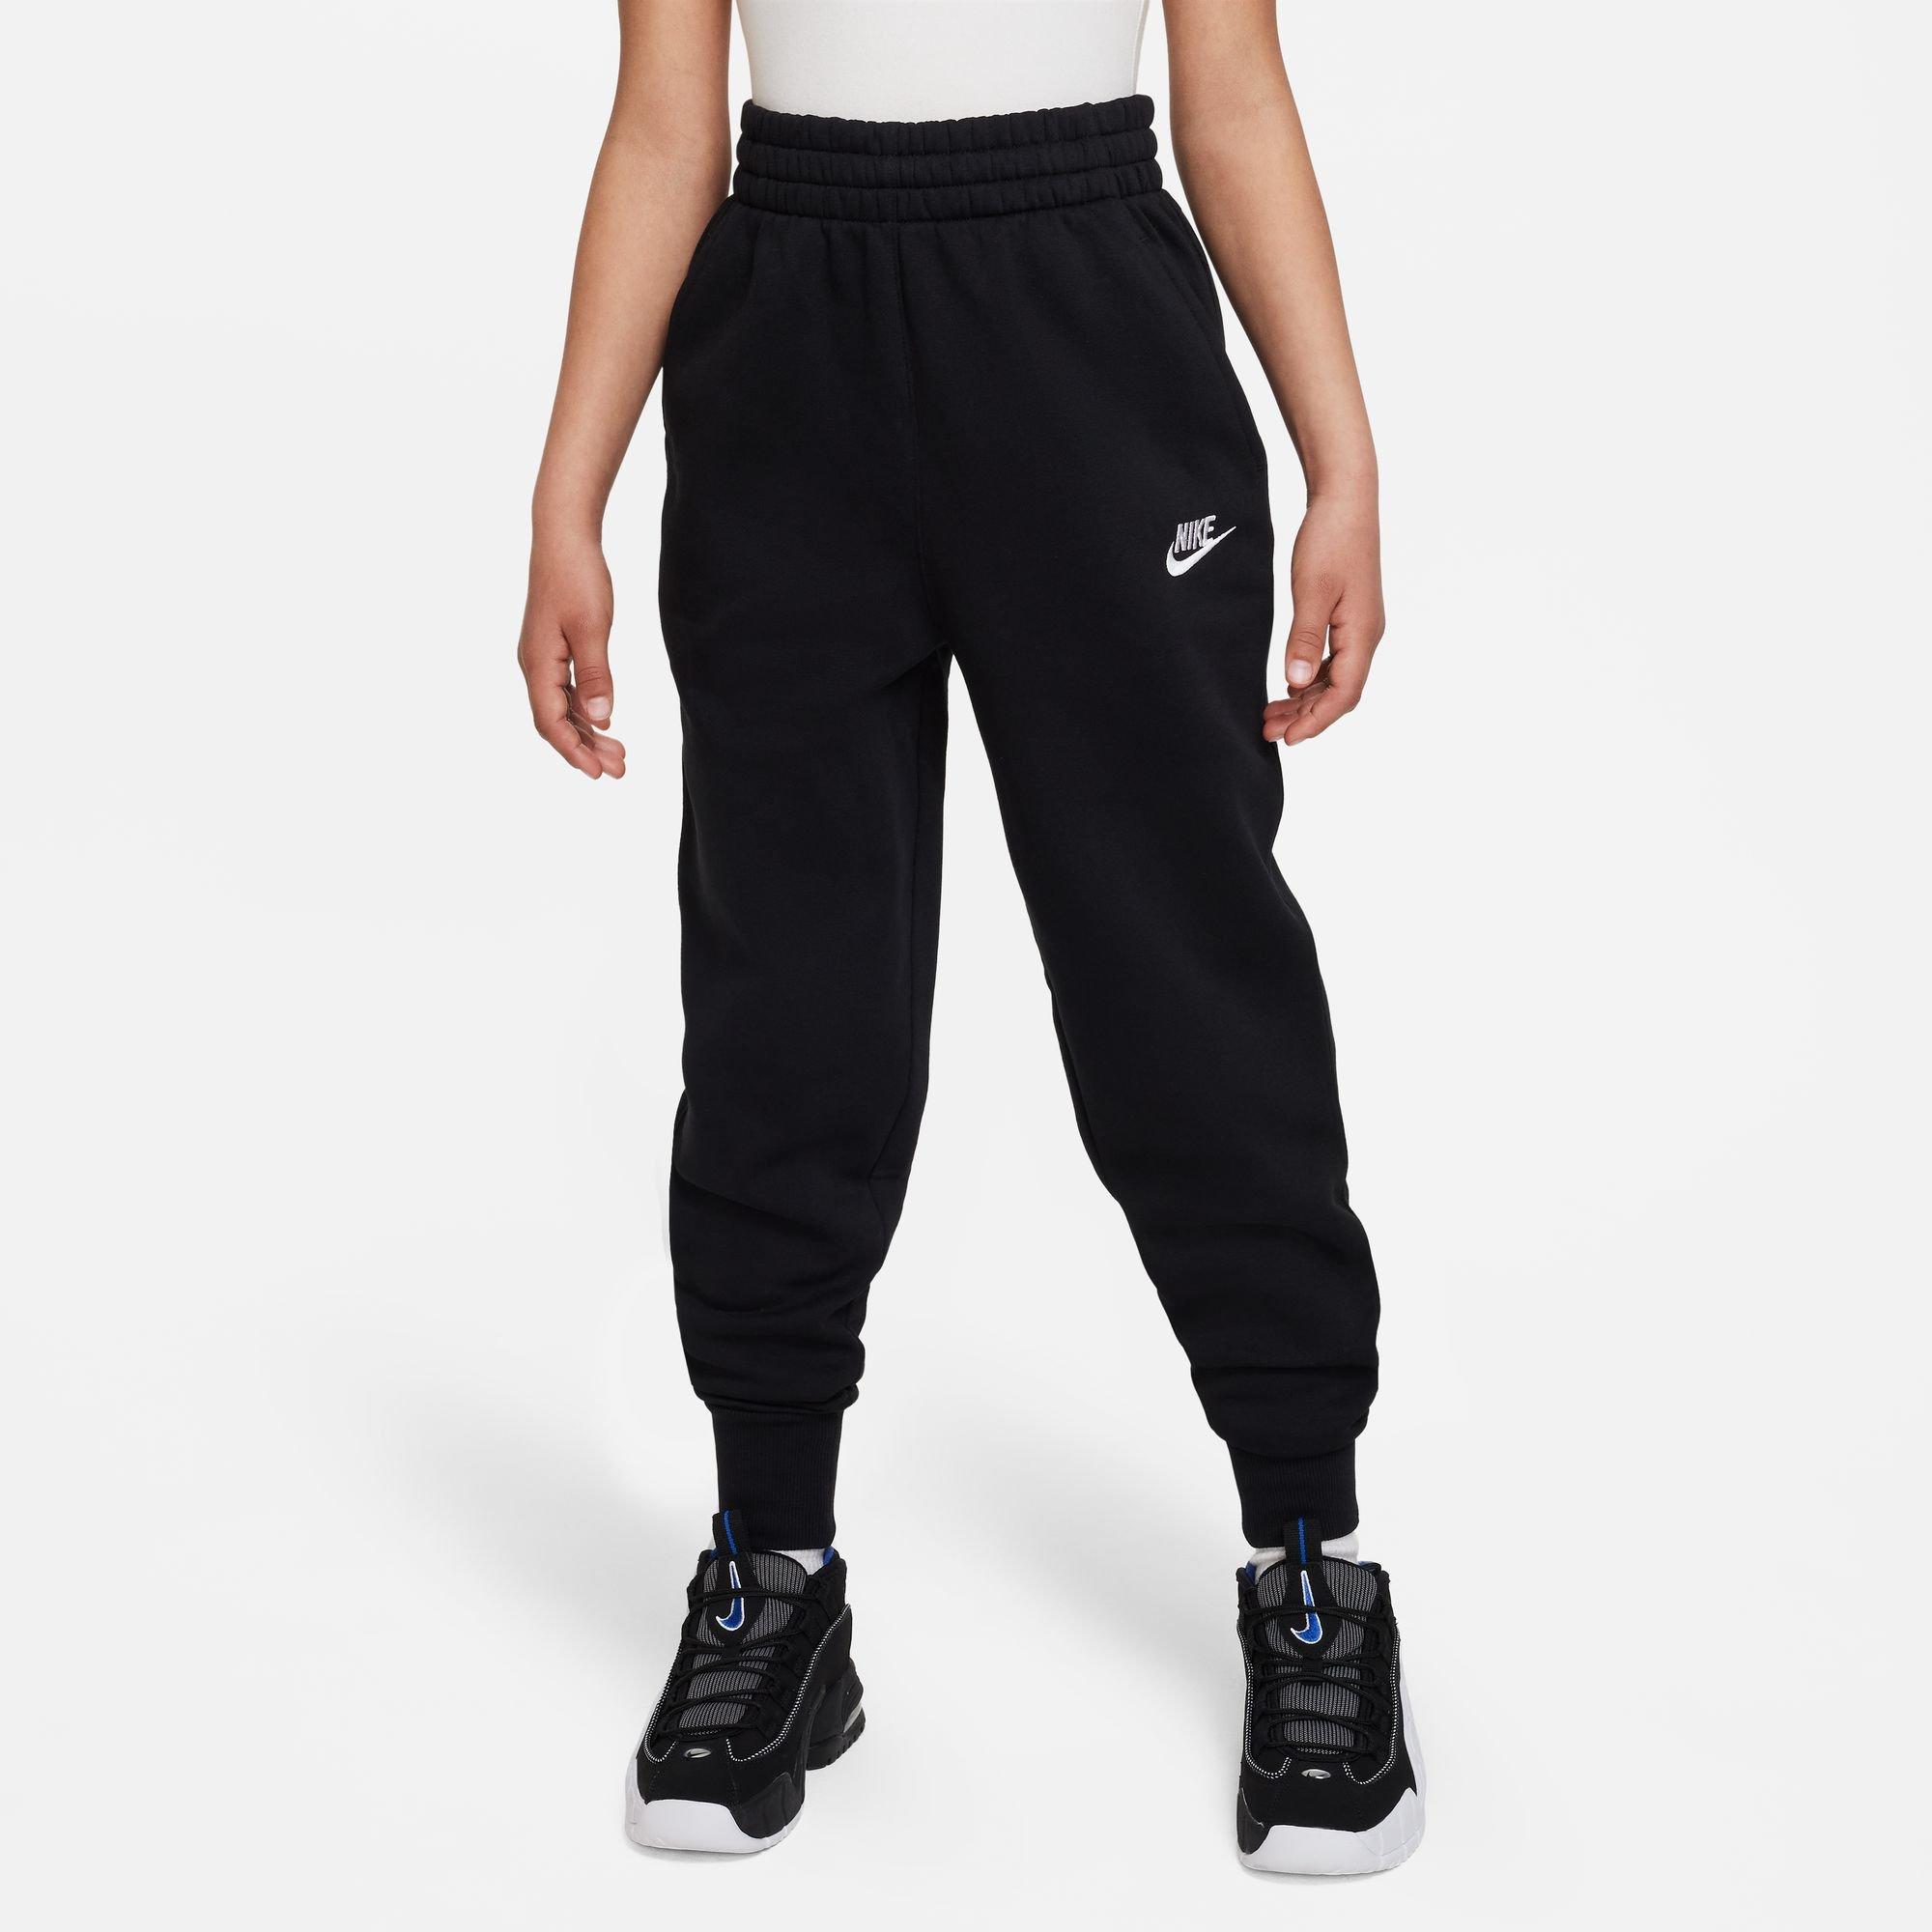 Girls' Big Kid Therma-Fit Cuff Pants from Nike